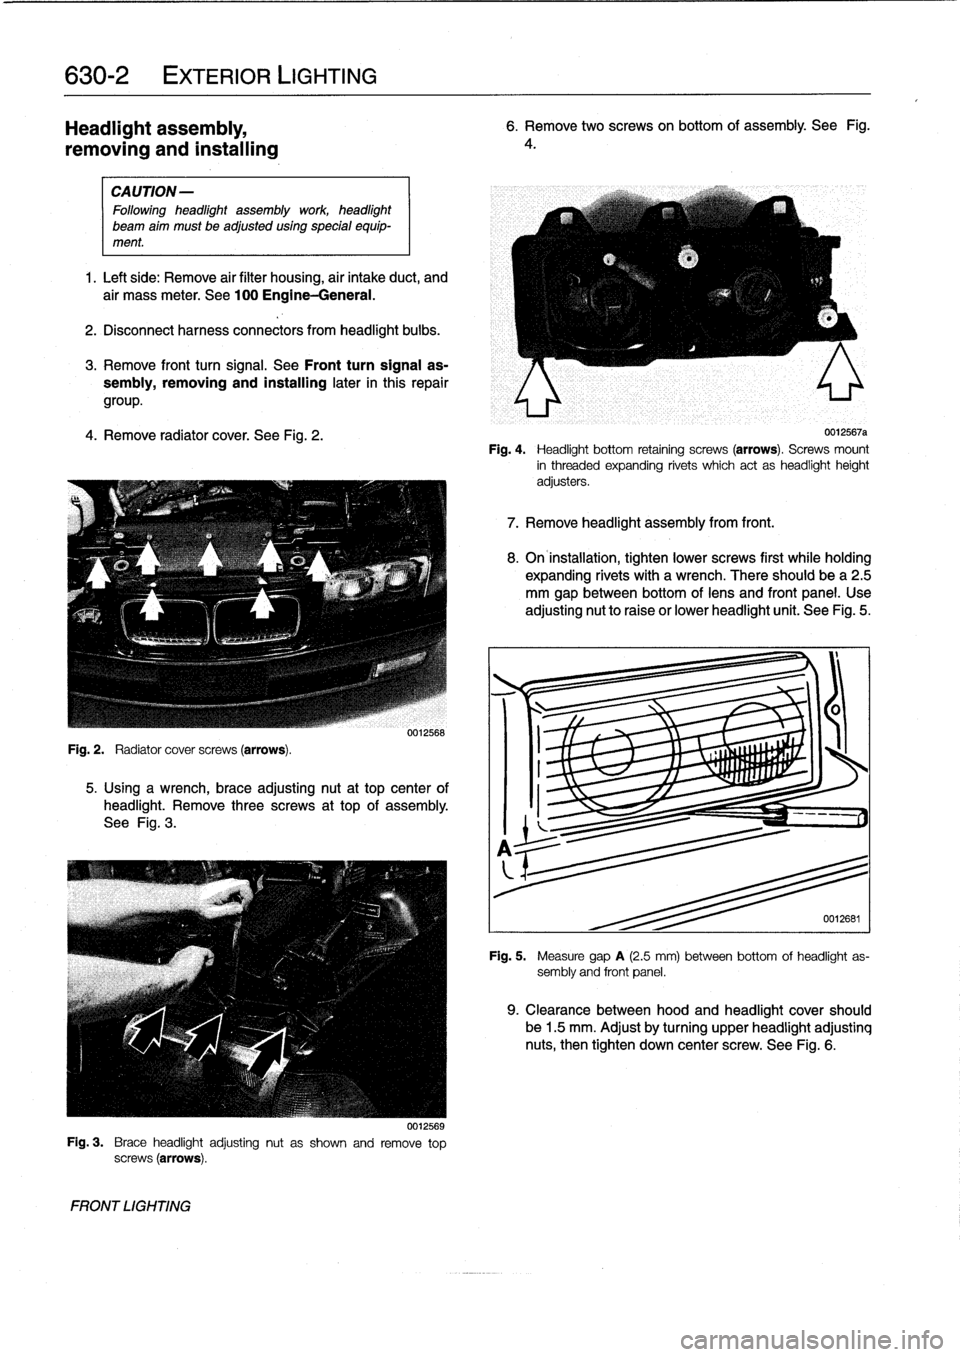 BMW 318i 1996 E36 Workshop Manual 
630-2

	

EXTERIOR
LIGHTING

Headlight
assembly,

removing
and
installing

CAUTION-

Followingheadlight
assembly
work
headlight

beam
aim
must
be
adjusted
using
special
equip-
ment
.

1
.
Left
side
: